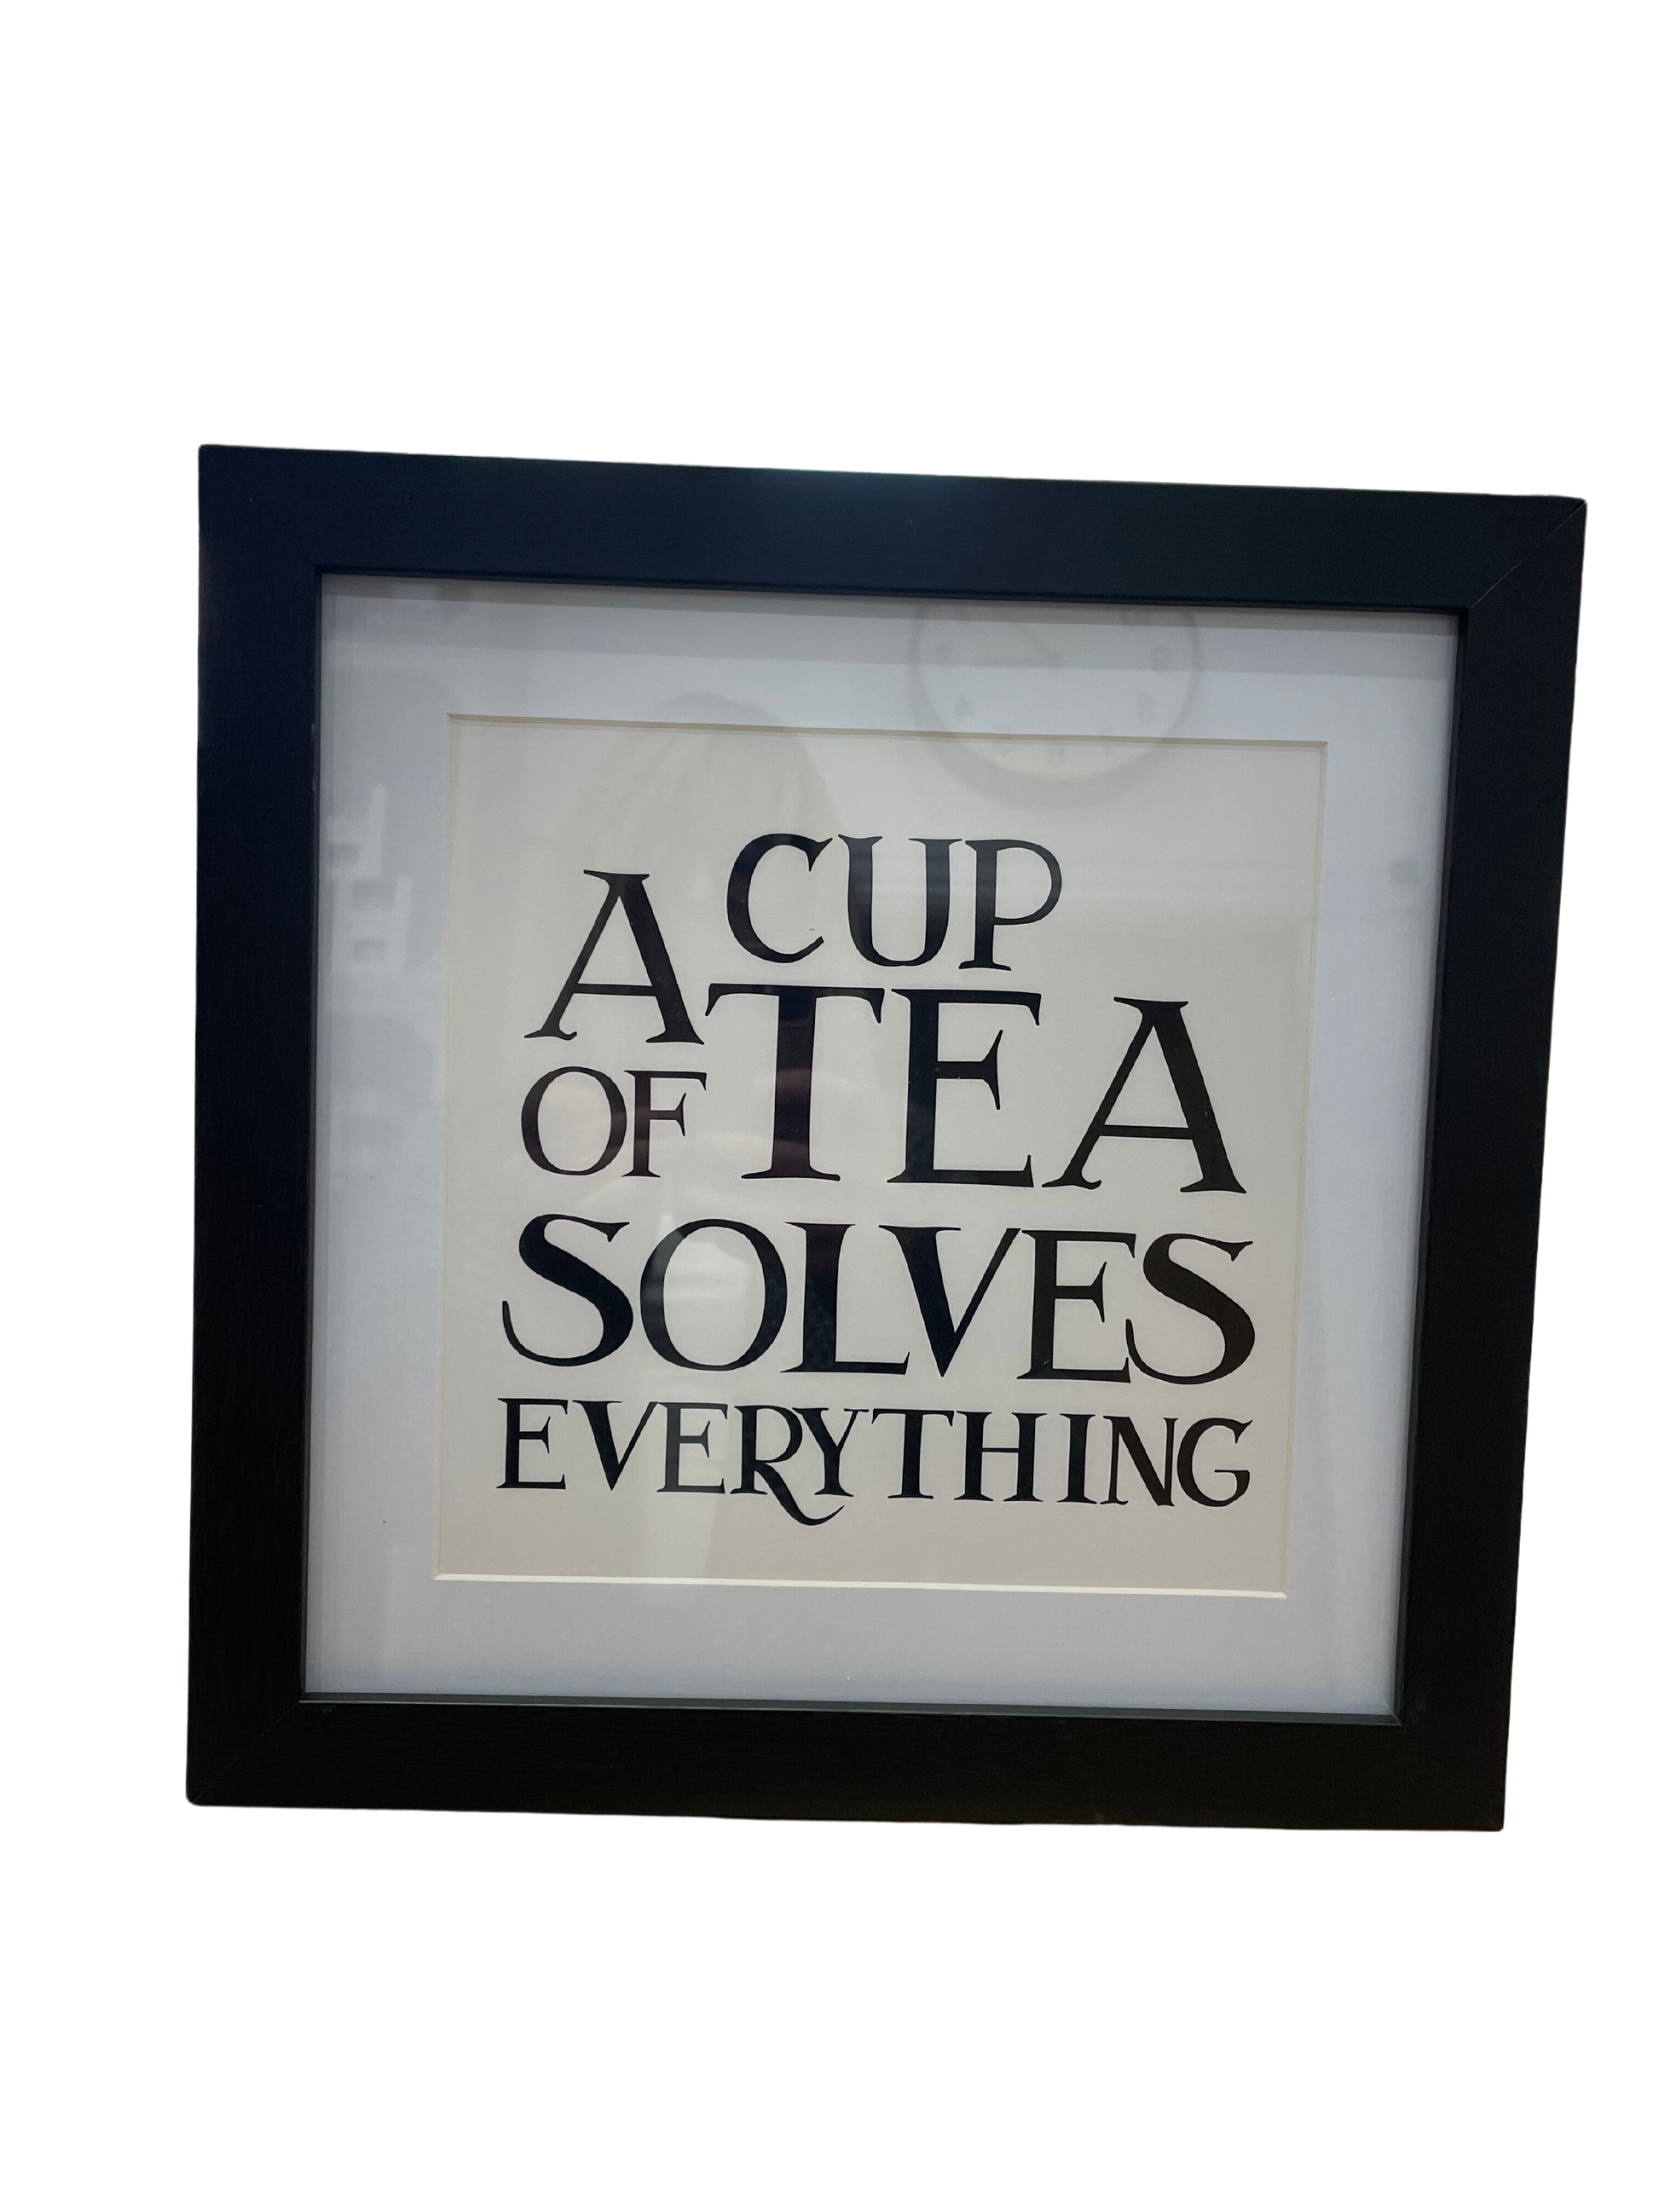 Pear & Port Framed Phrase Prints 25cm x 25cm - A Cup of Tea Solves Everything